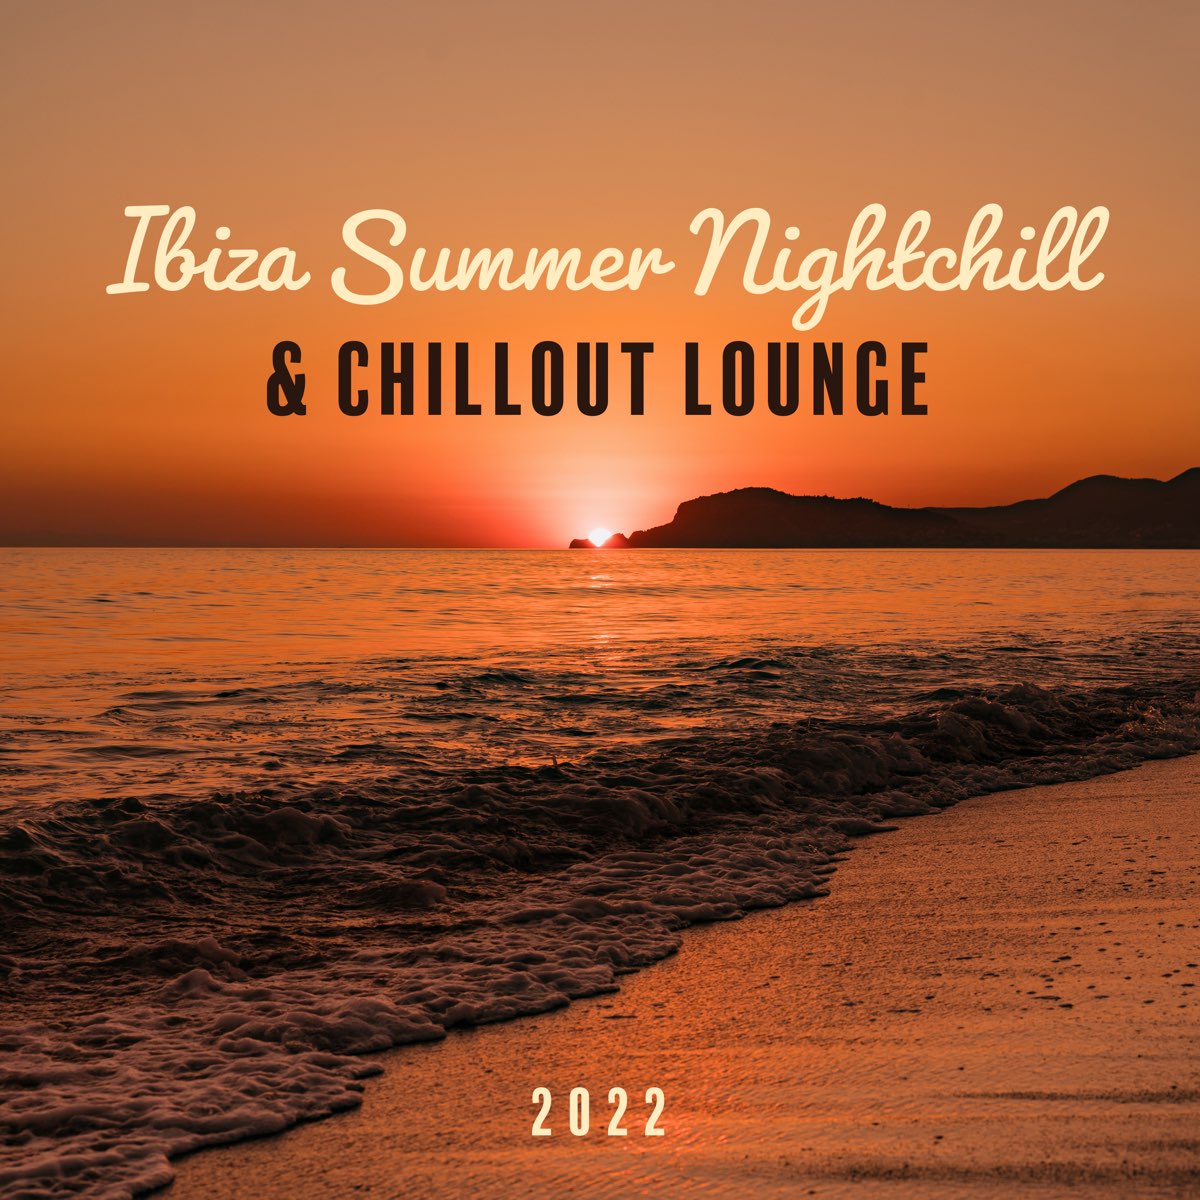 Chillout Lounge. Cosmic Chill Lounge. De-Phazz - Jelly Banquet (2022). Various – Cosmic Chill Lounge Vol.2. Dj chill